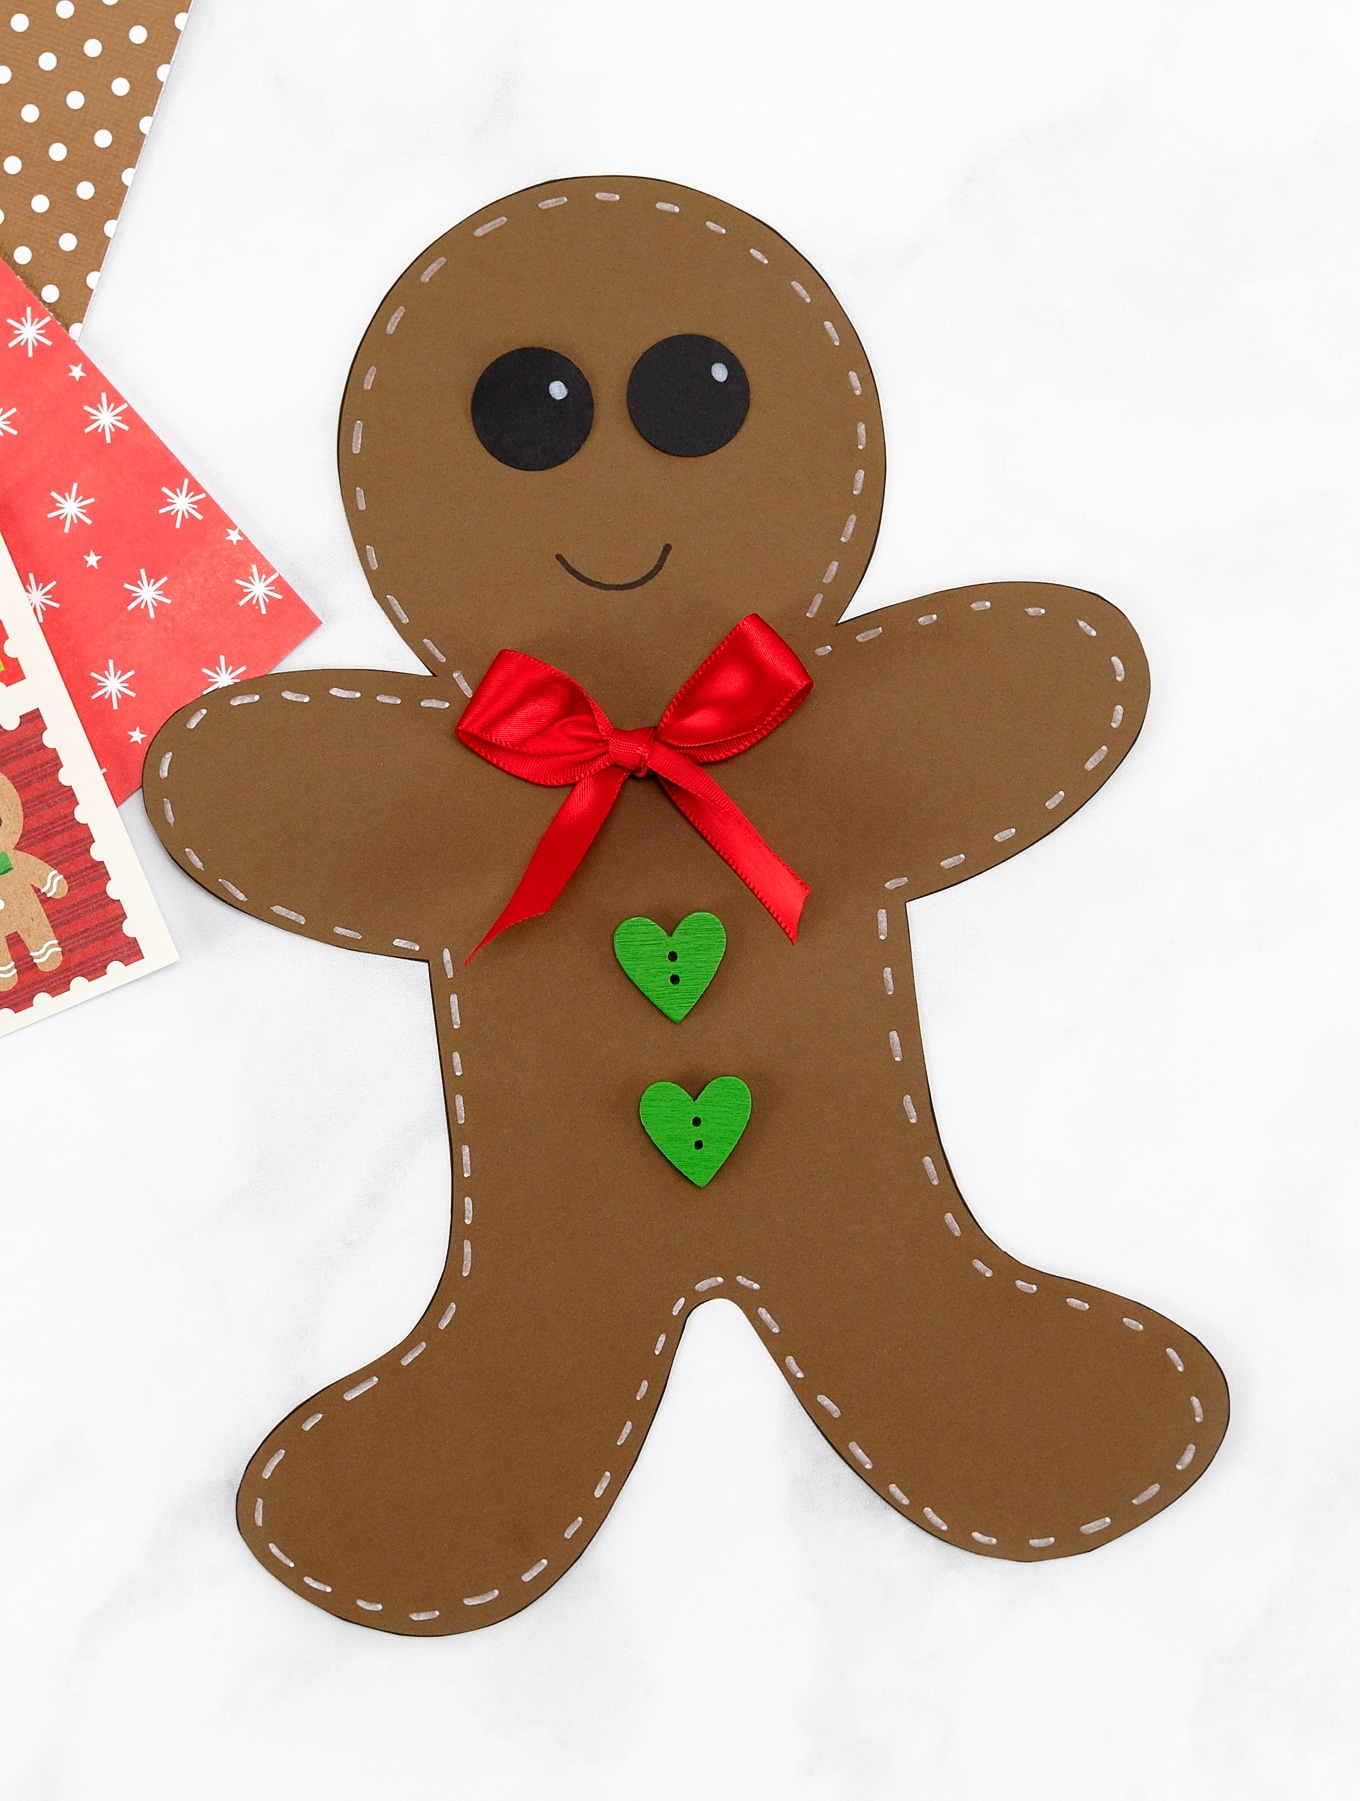 gingerbread-man-template-fireflies-and-mud-pies